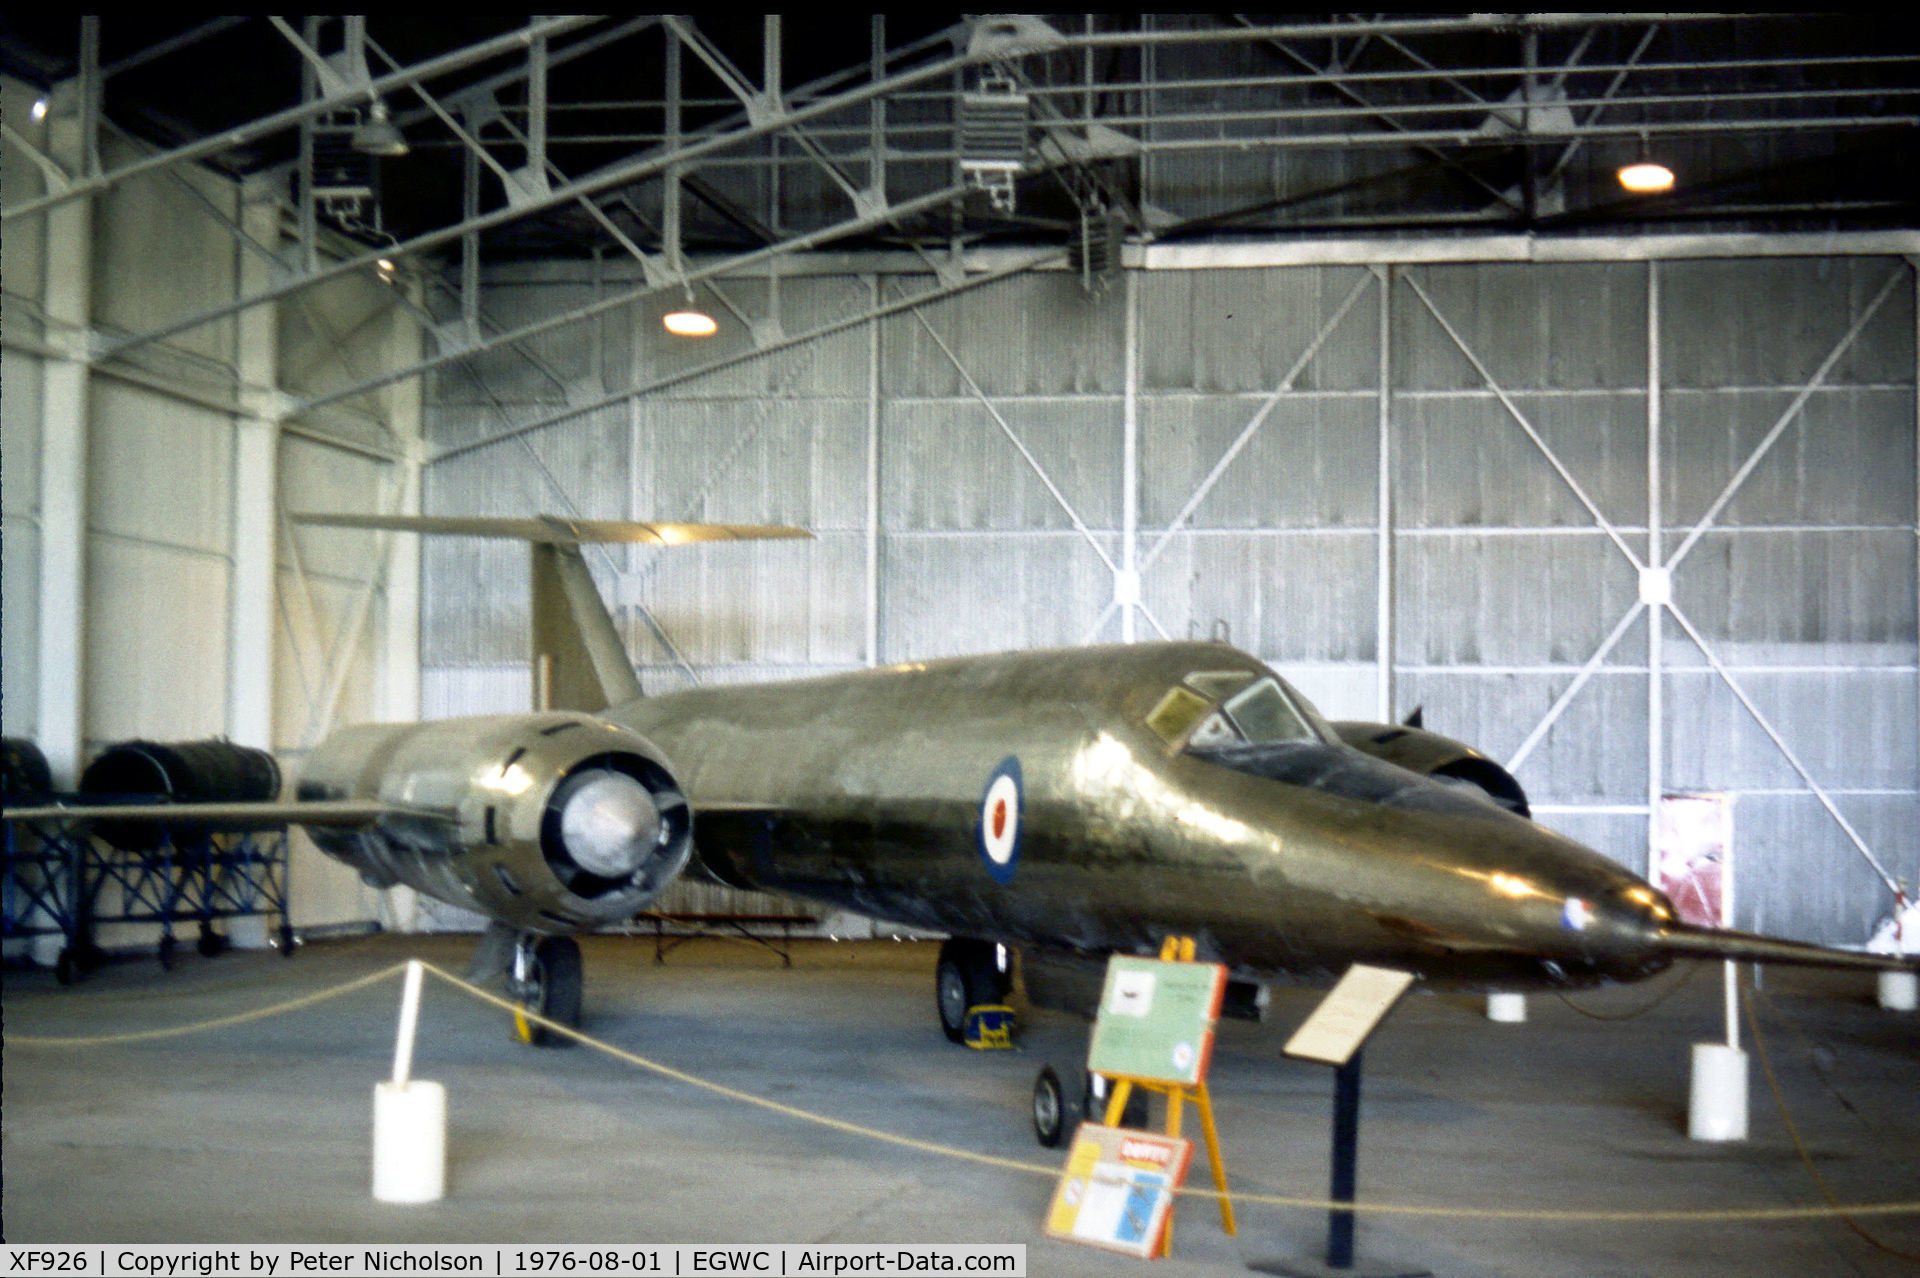 XF926, 1963 Bristol 188 C/N 13519, Bristol 188 as seen at the Cosford Aerospace Museum in August 1976.